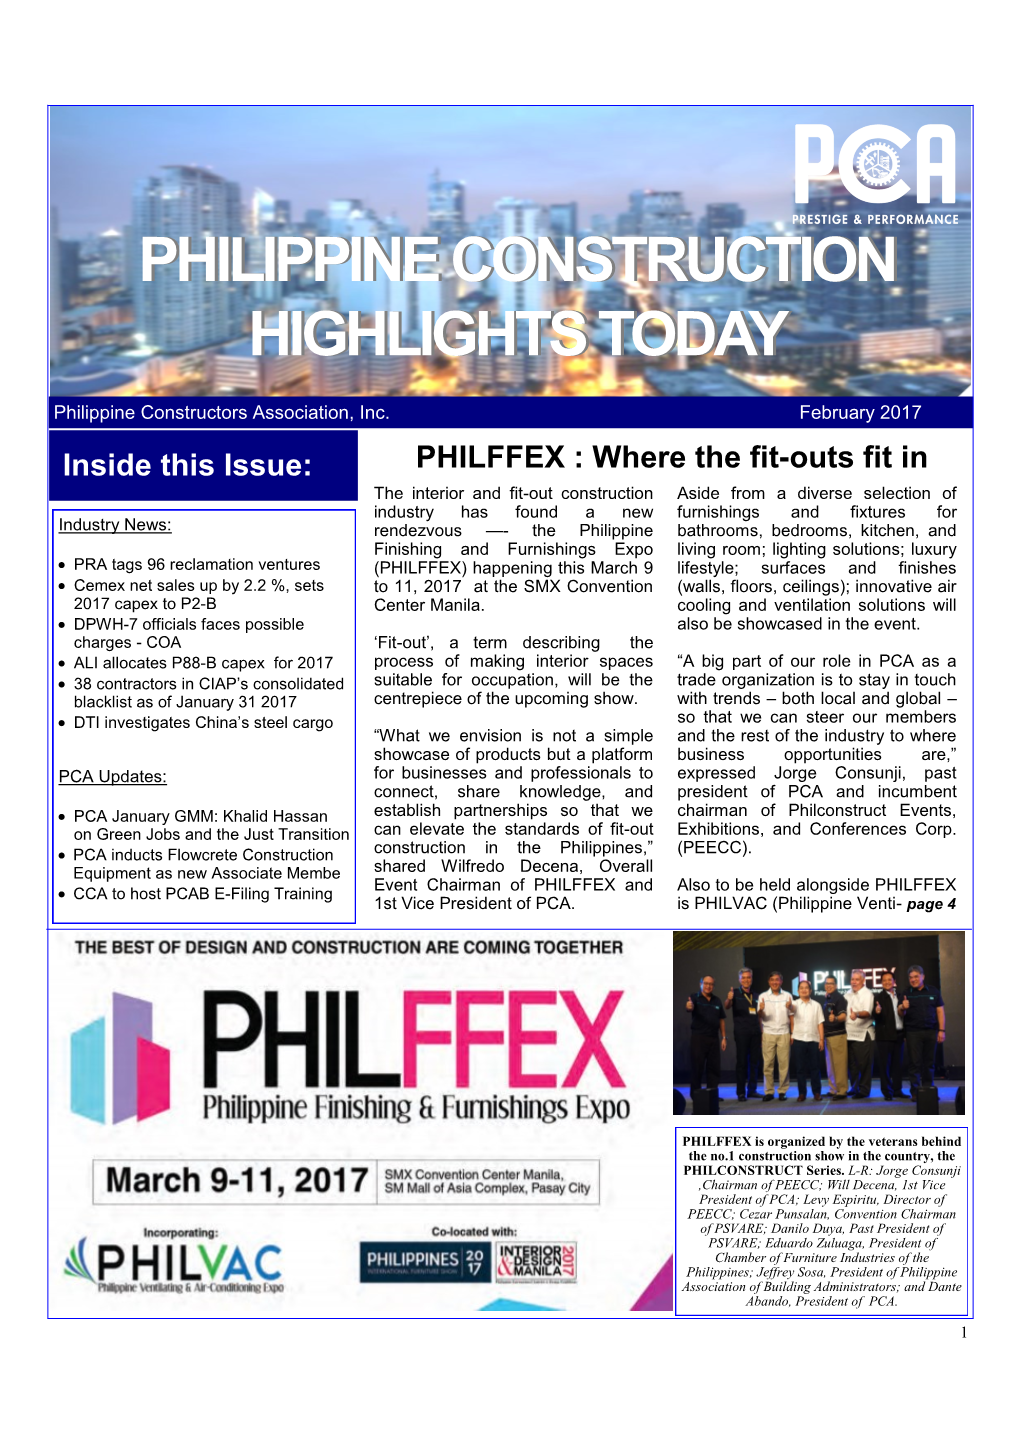 PHILIPPINE CONSTRUCTION HIGHLIGHTS TODAY PCA January GMM: ILO,CO-Manila Director Khalid Hassan Editor’S Note: on Green Jobs and the Just Transition